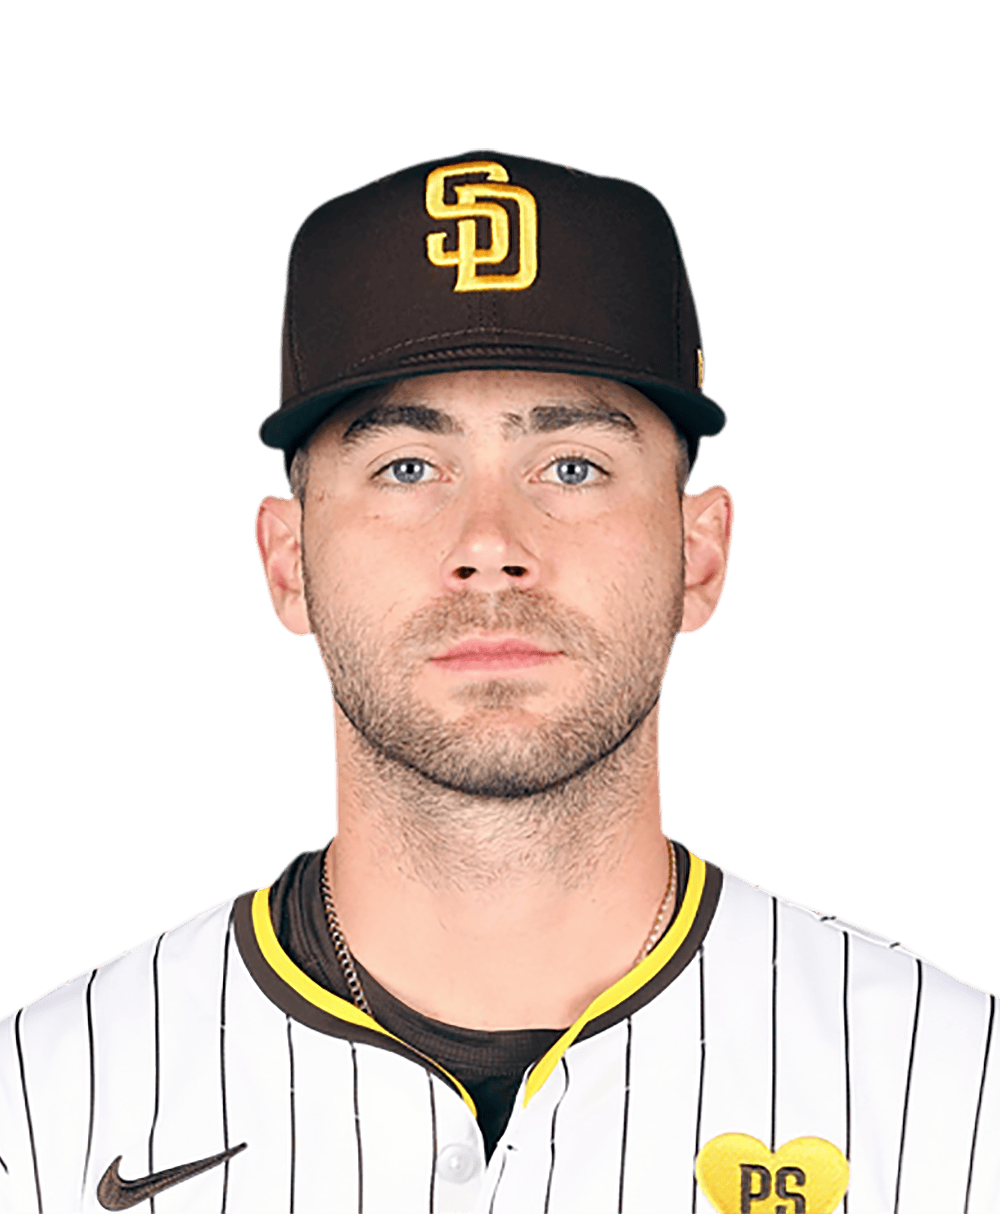 San Diego Padres pro and El Paso native comes home to play